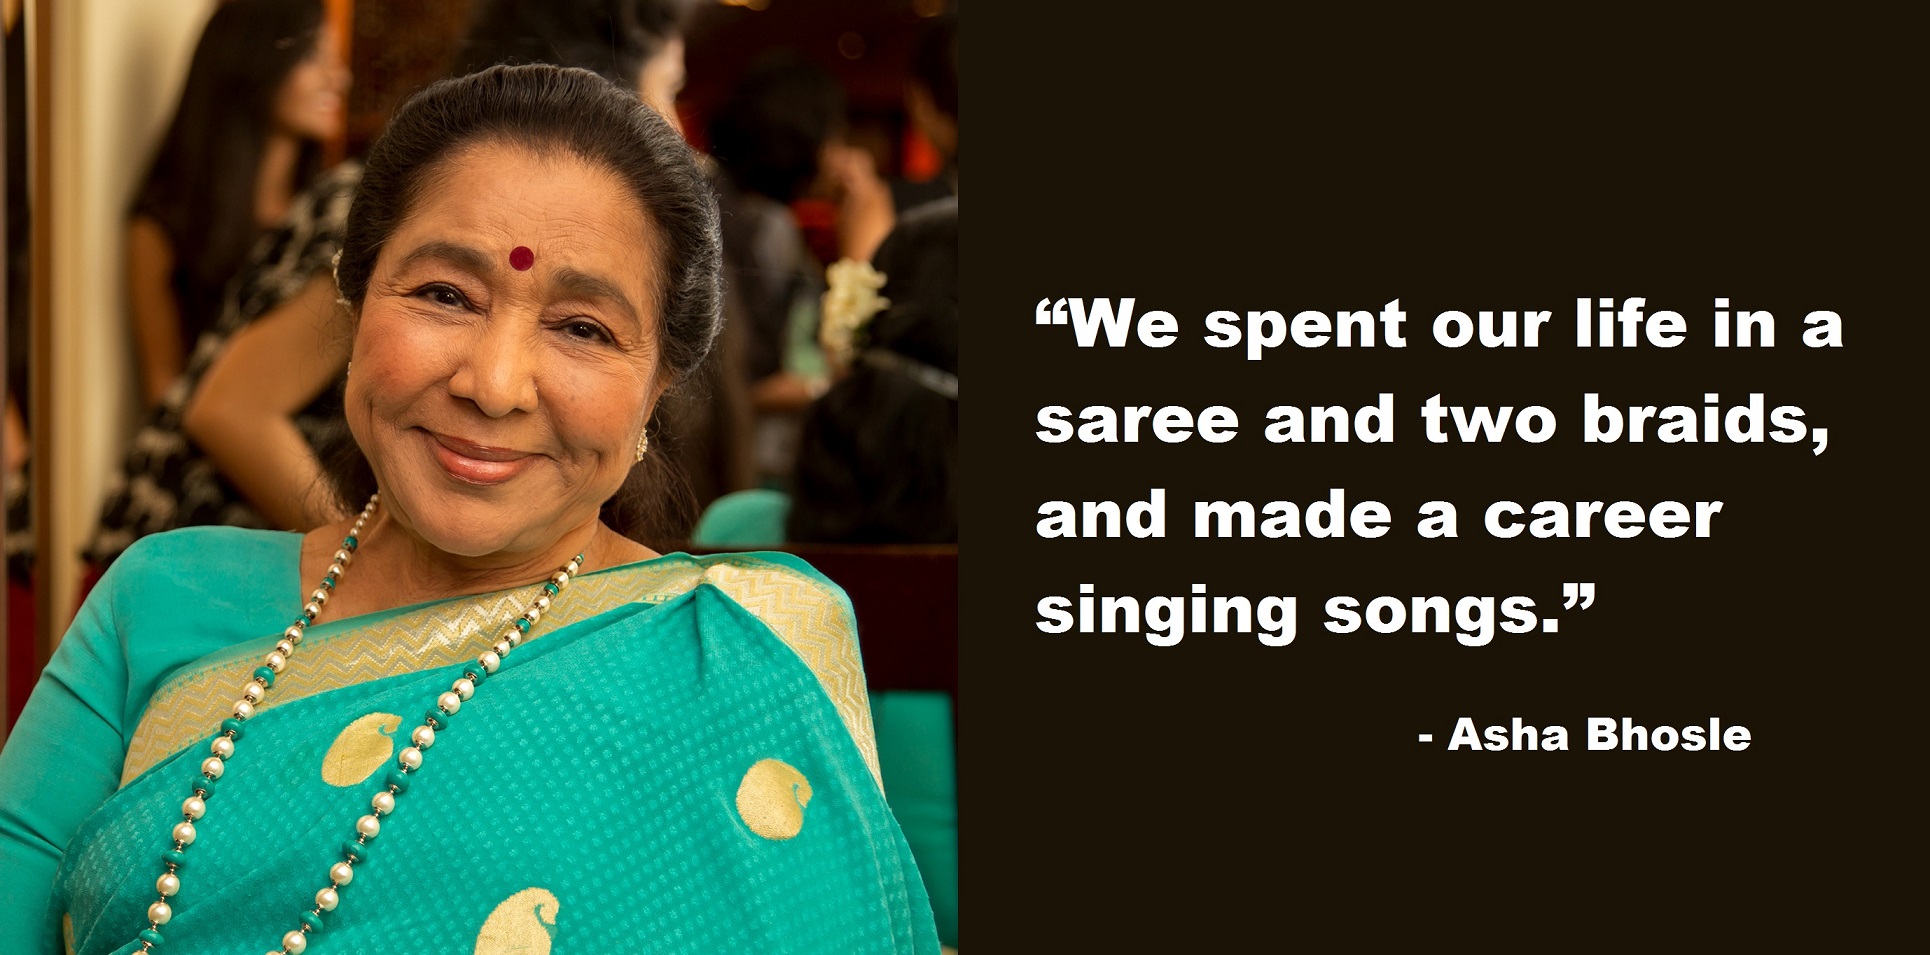 Asha Bhosle Criticizes Singing Reality Shows For Concentrating On ‘Dancing’ and ‘Appearance’